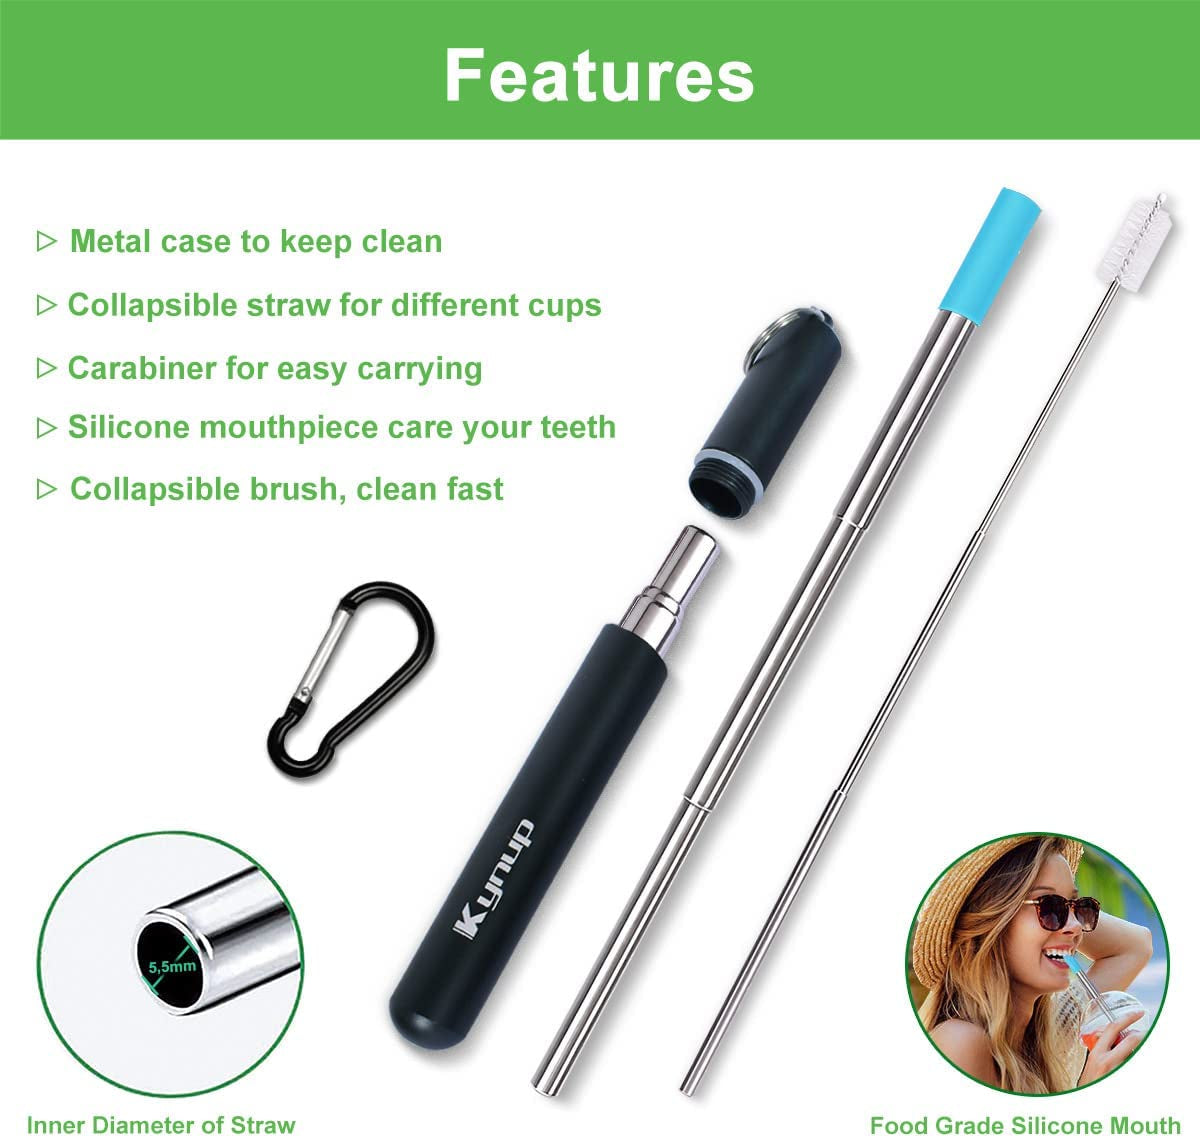 Reusable Straws, 4Pack Collapsible Portable Foldable Metal Straw Stainless Steel Drinking Travel Telescopic Straw with Case, Cleaning Brushes, Keychain Gifts (Blue-Black- Rose Gold-Silver)